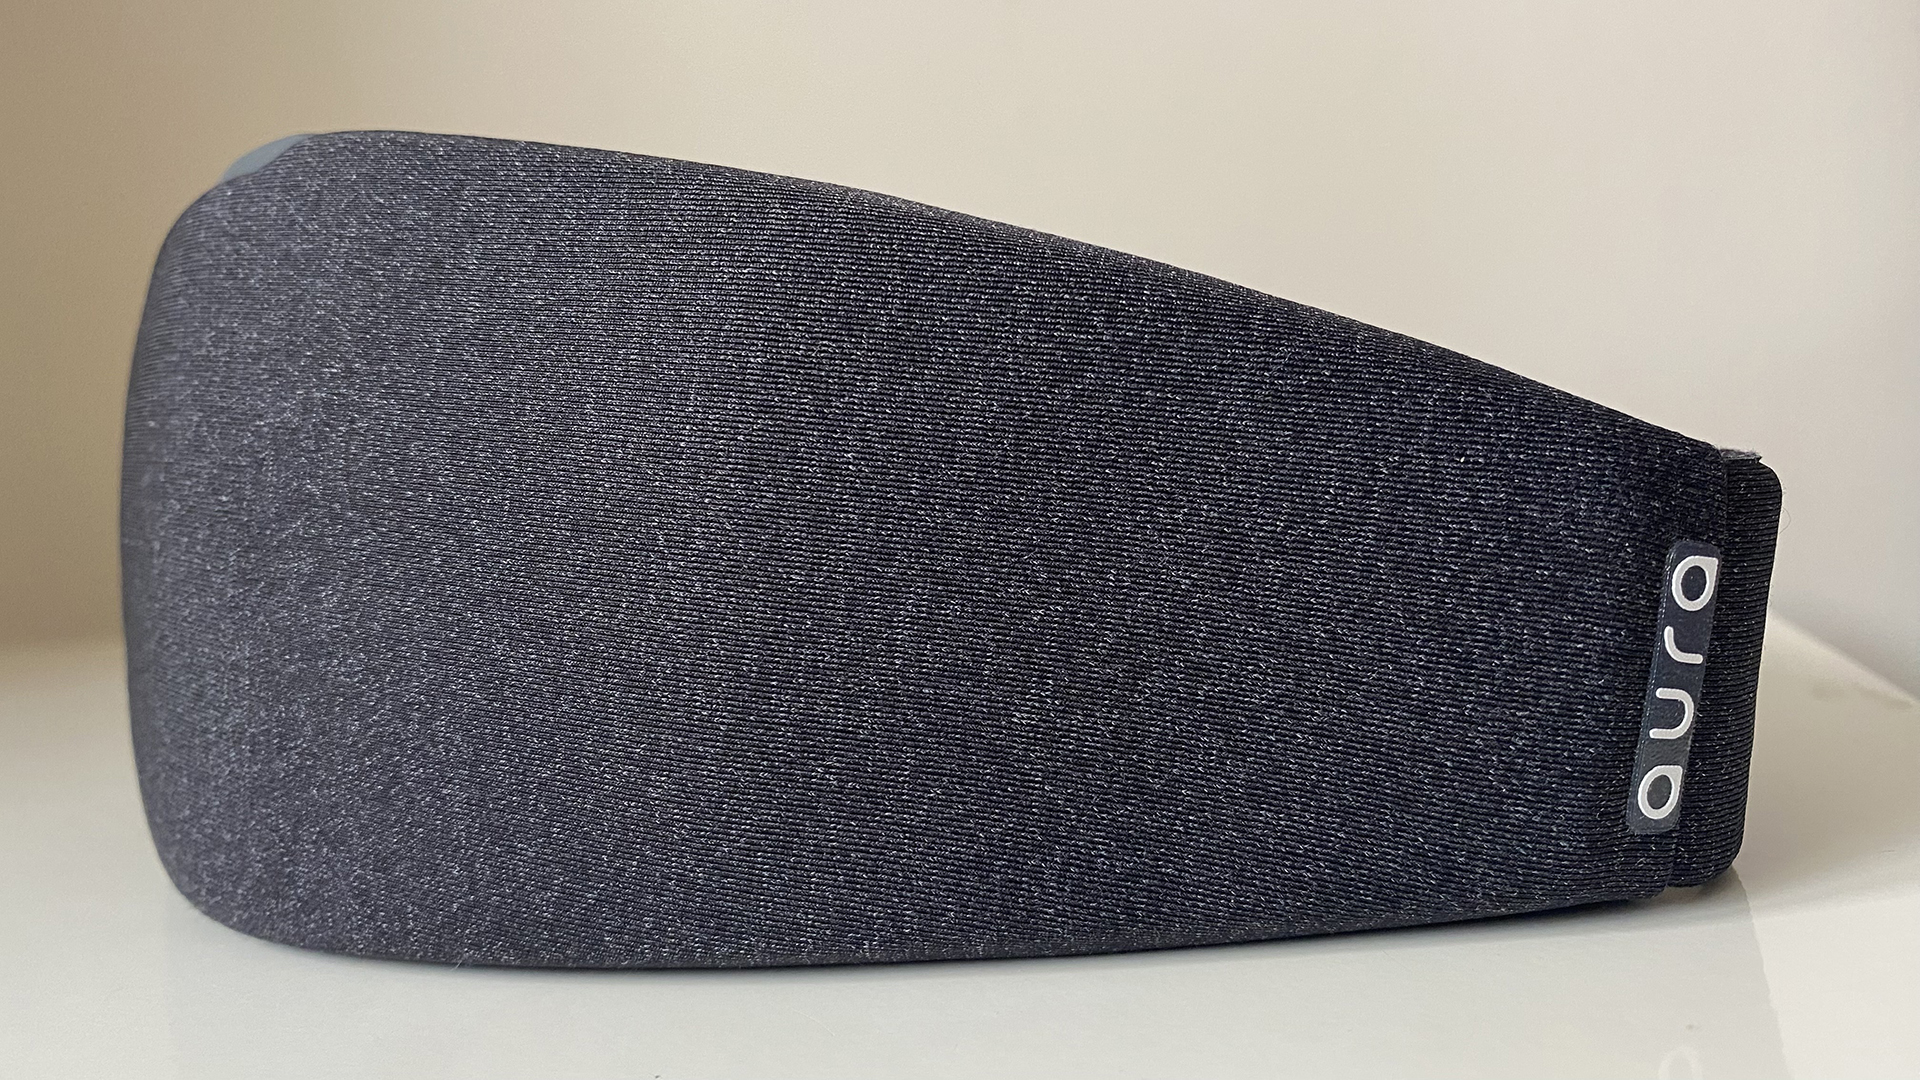 A side view of the Aura smart sleep mask